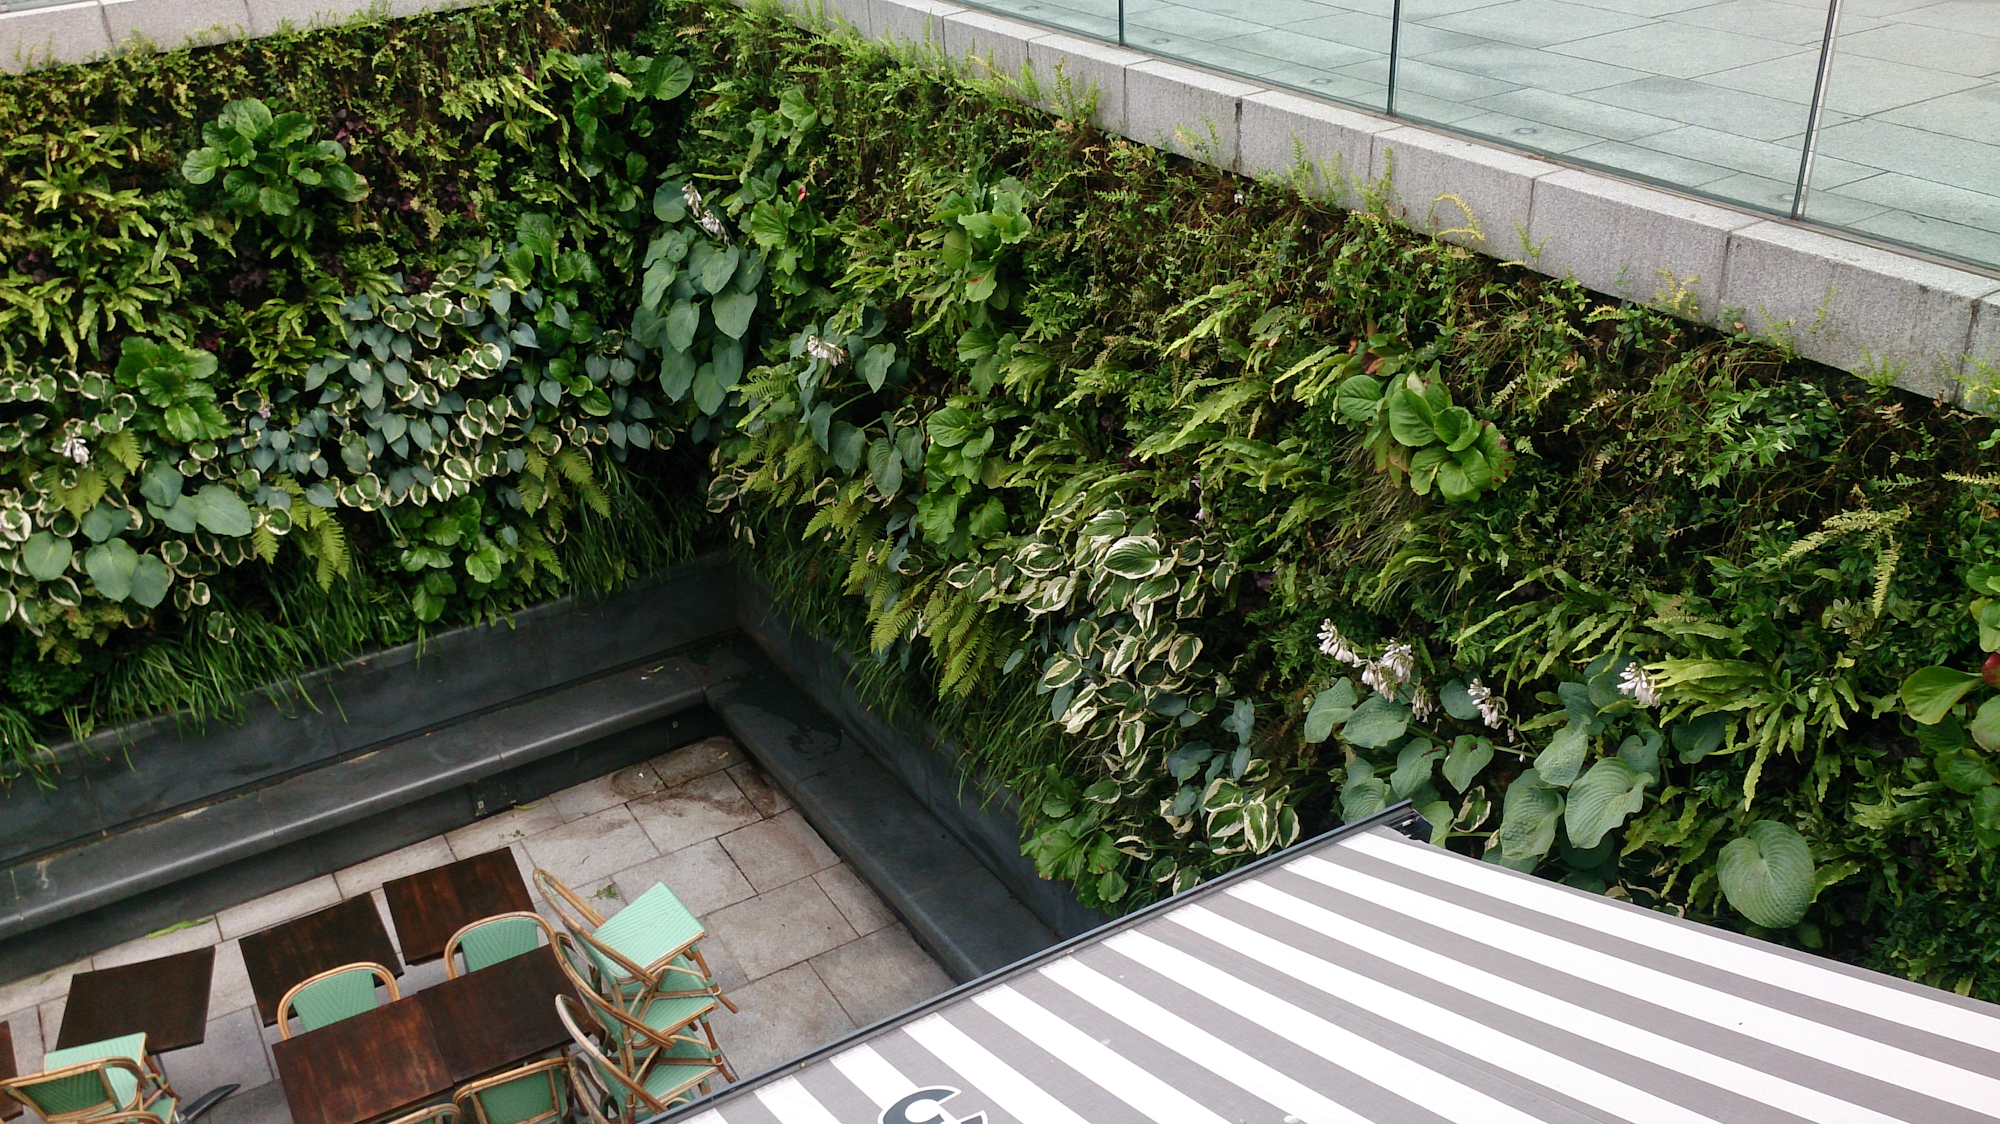 living wall at a restaurant eating area